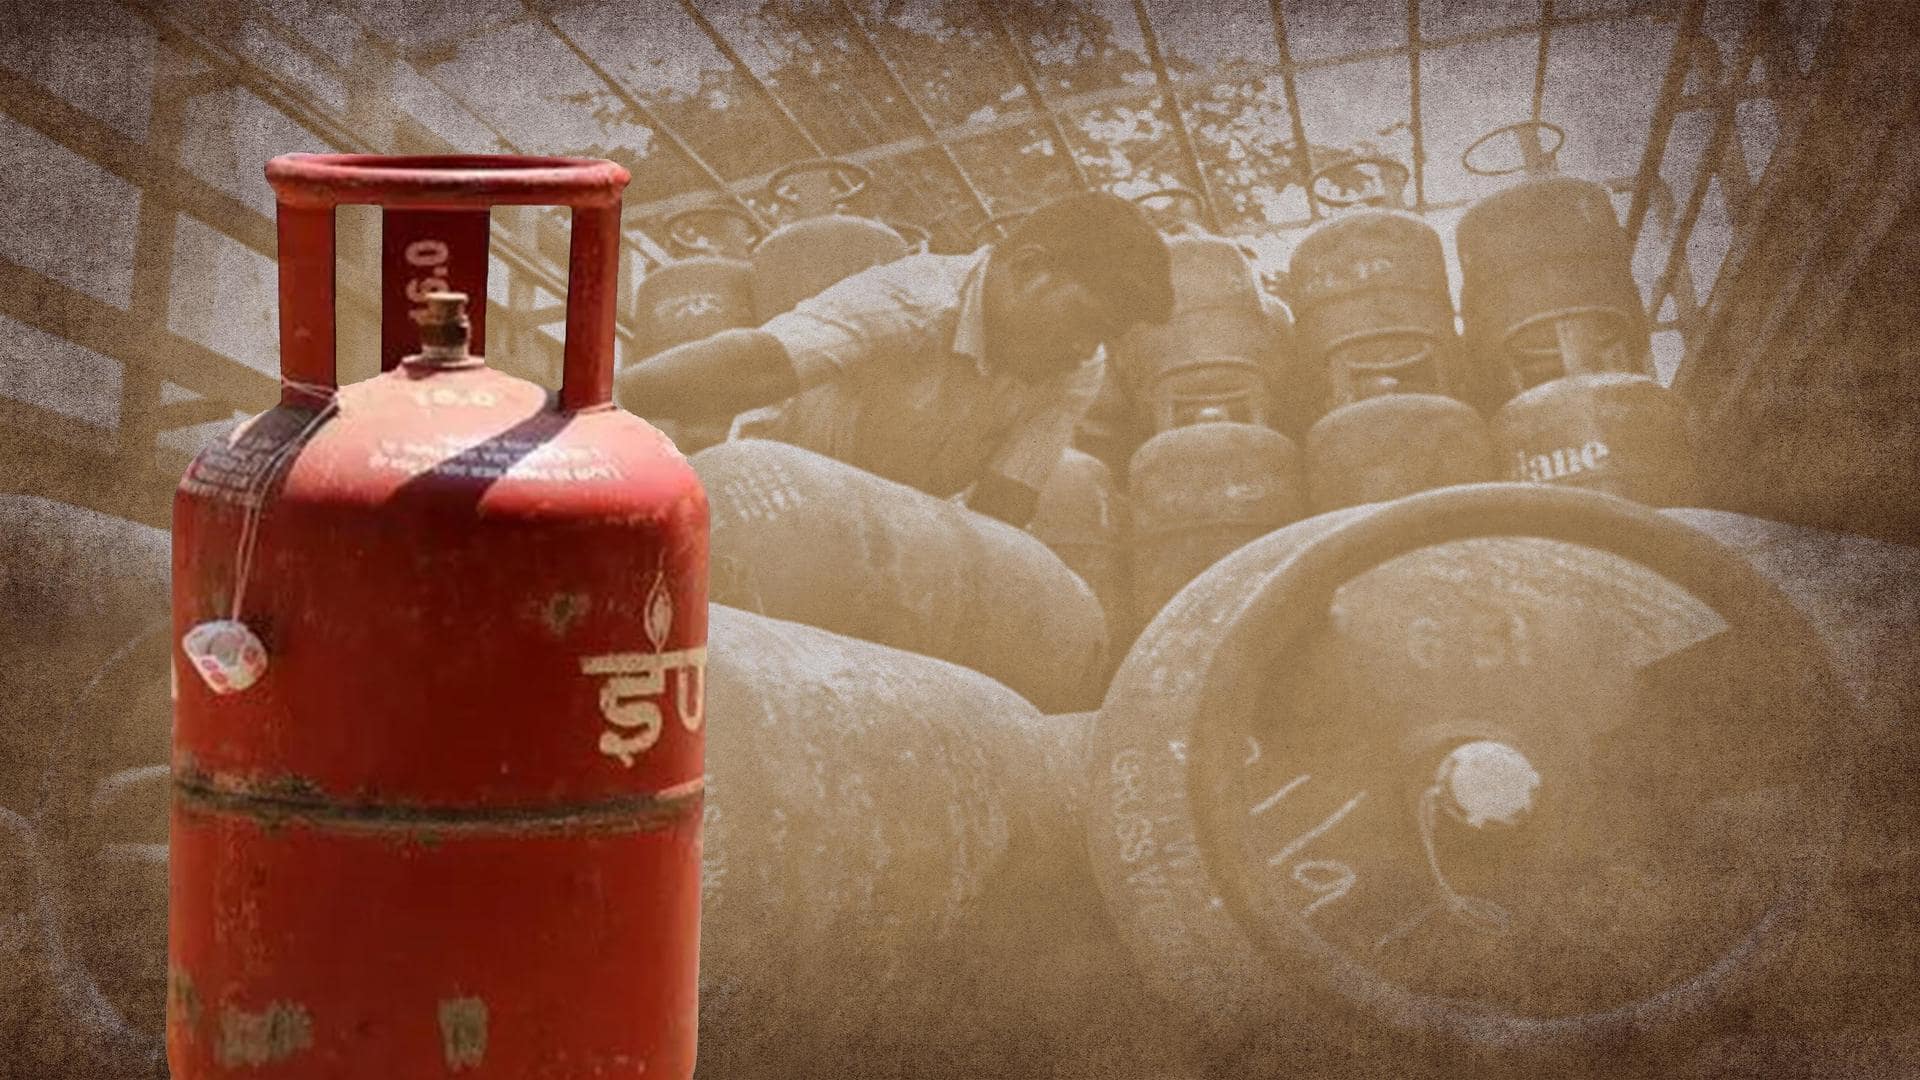 Domestic and commercial LPG cylinder prices hiked across India